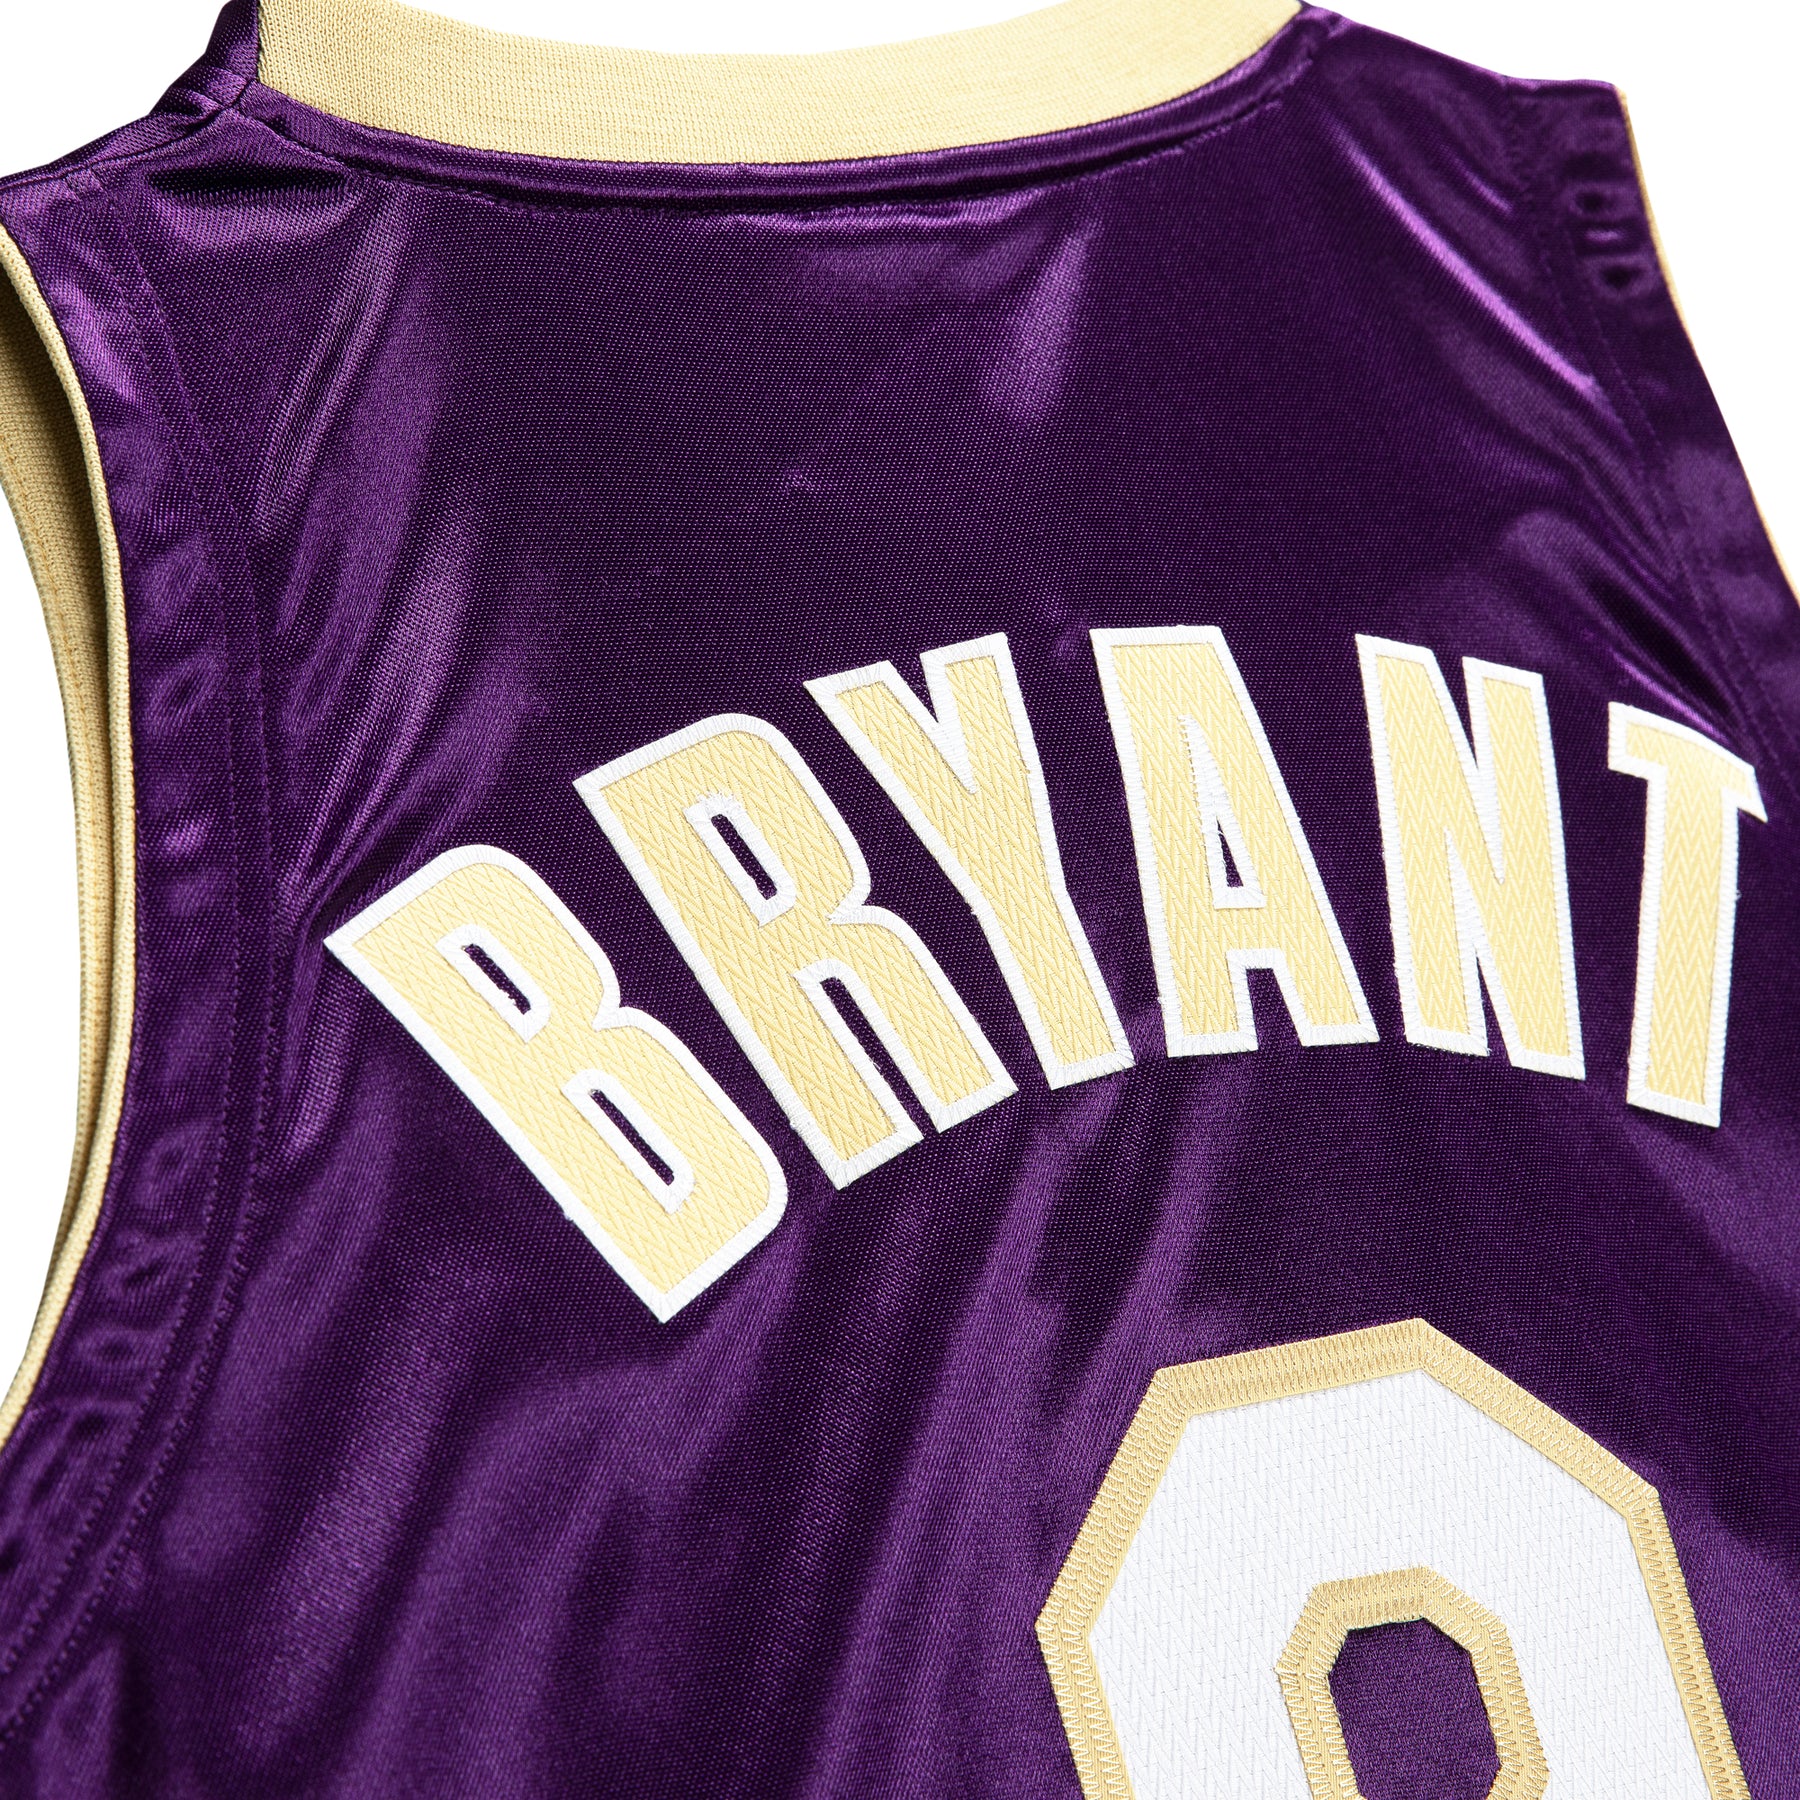 Shop Mitchell & Ness Los Angeles Lakers HOF Kobe Bryant Authentic Jersey  AJY4CP20021-LALGOLD96KBR gold